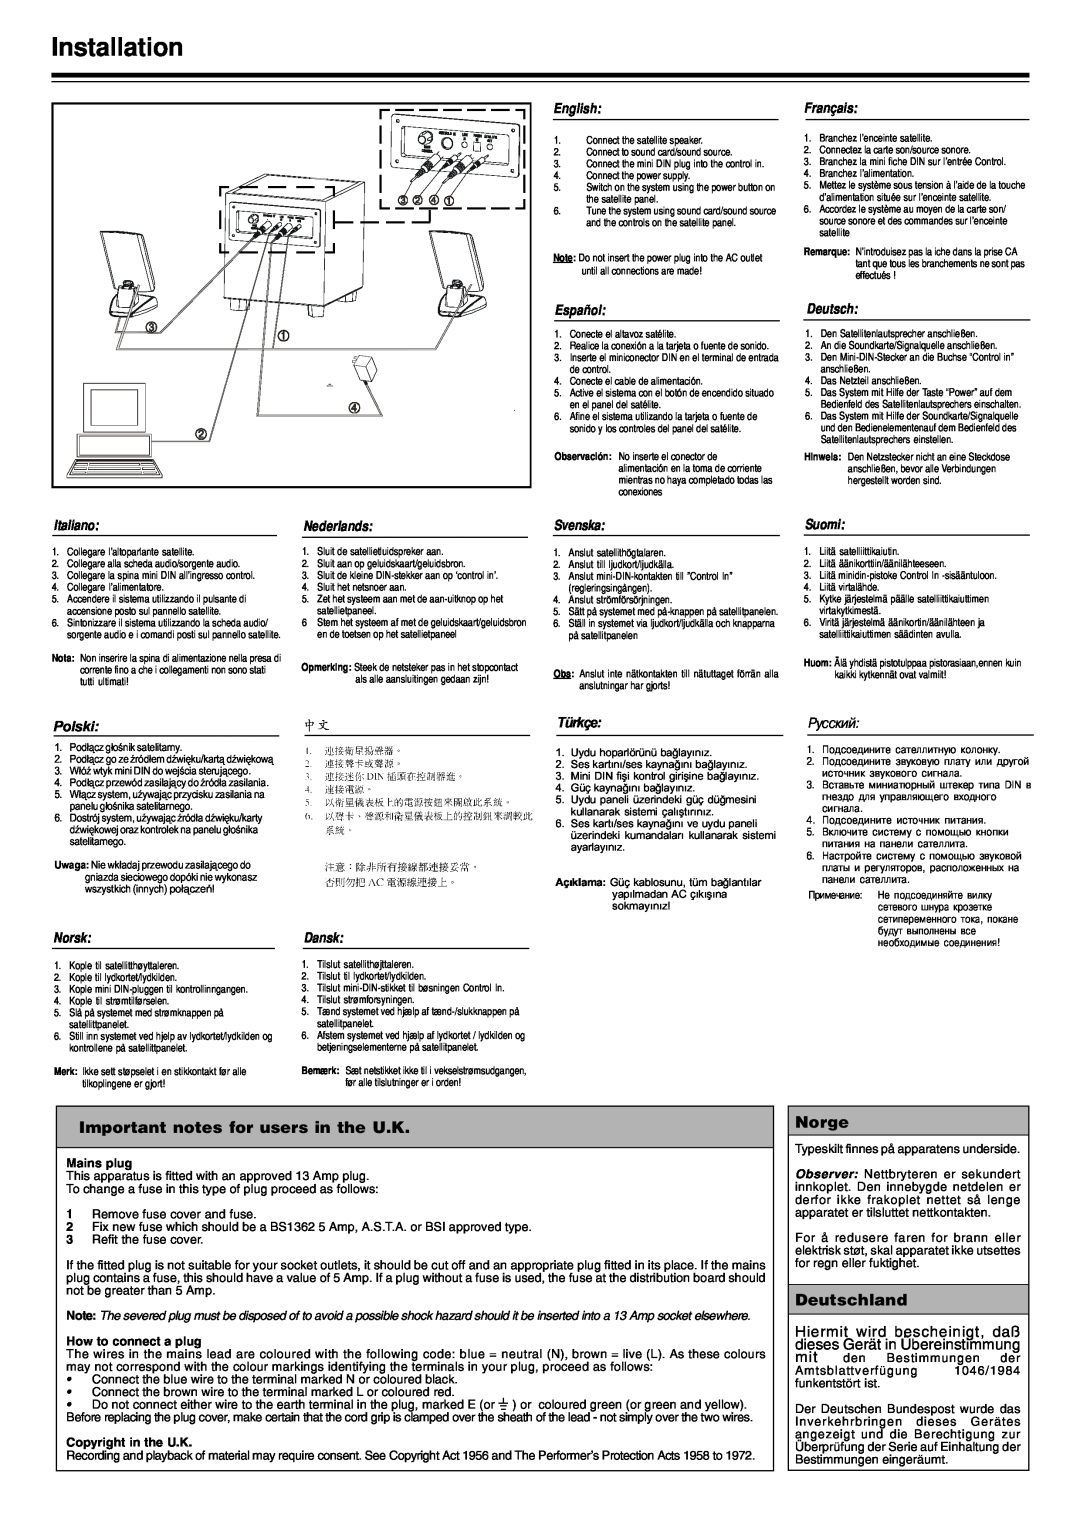 Philips MMS3031799 important safety instructions Installation, Important notes for users in the U.K, Norge, Deutschland 